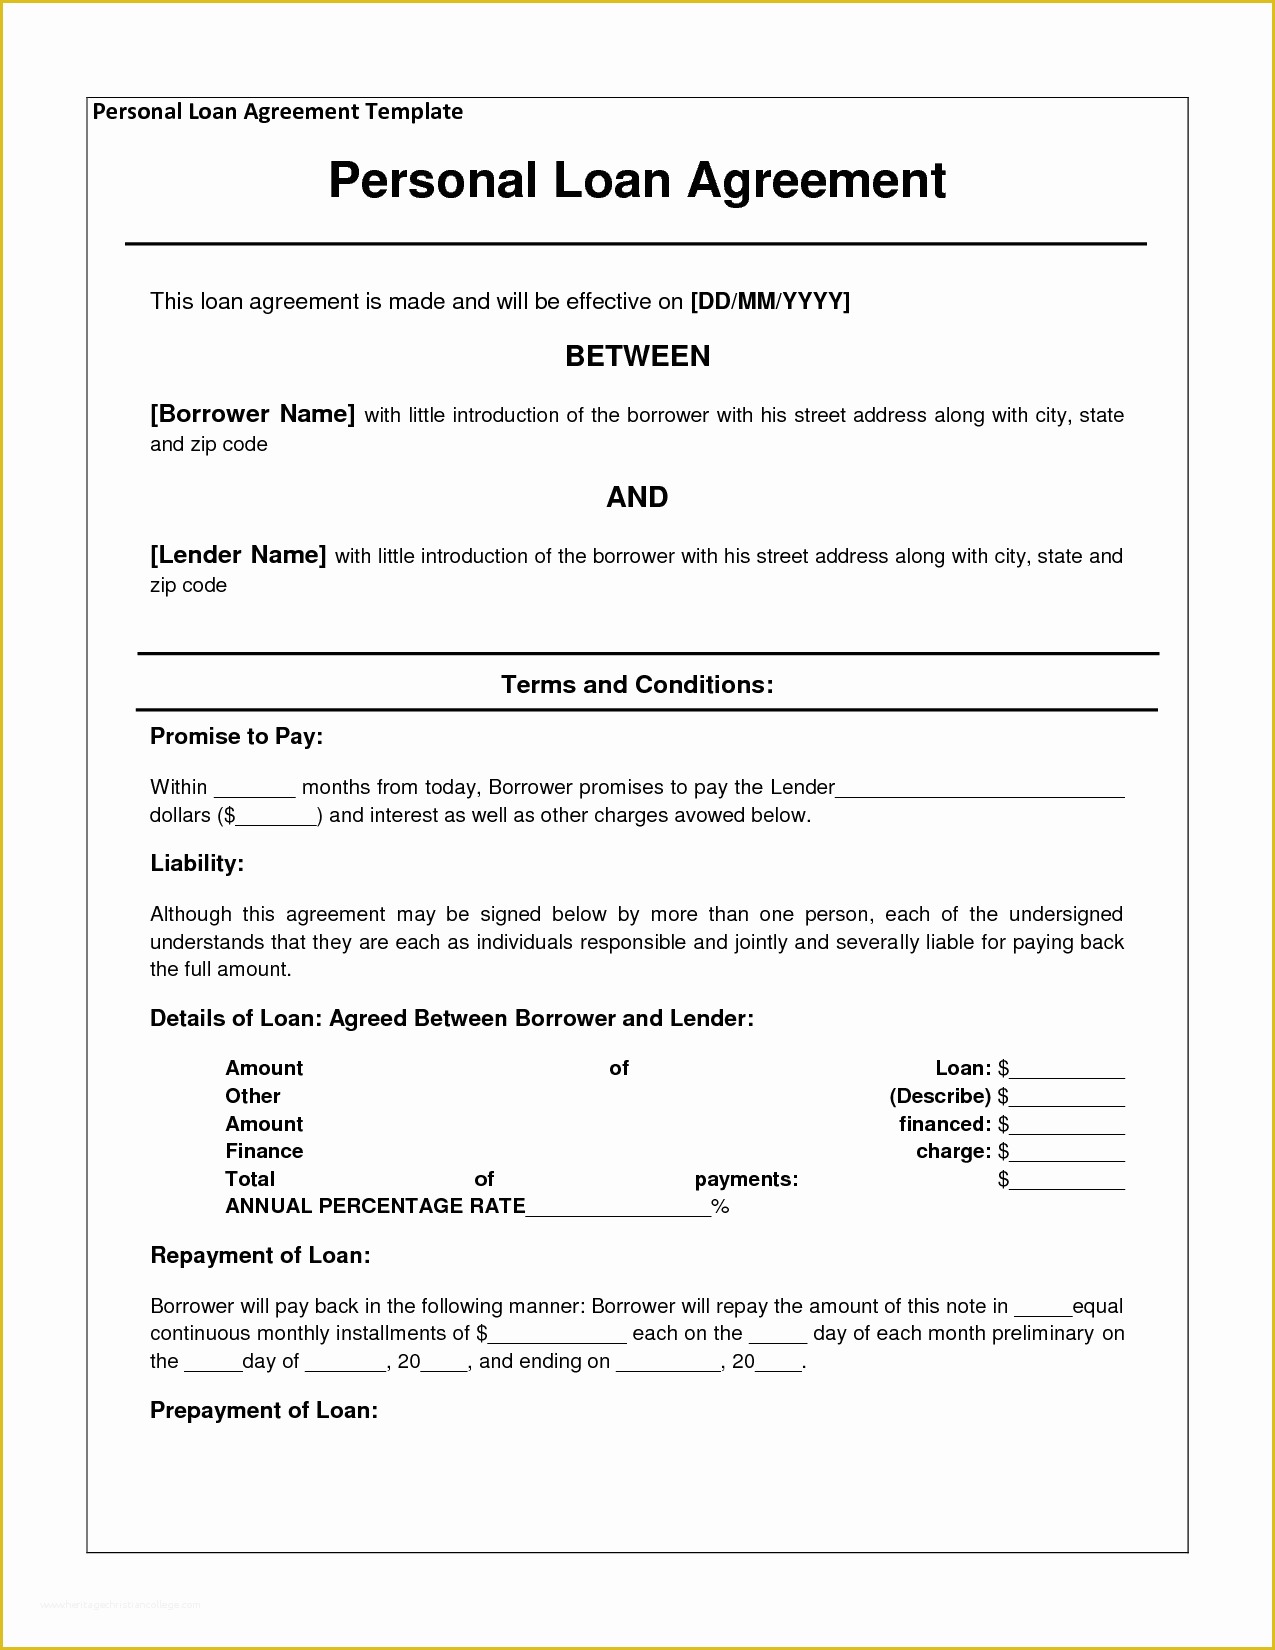 Free Promissory Note Template for Personal Loan Of Free Personal Loan Agreement form Template $1000